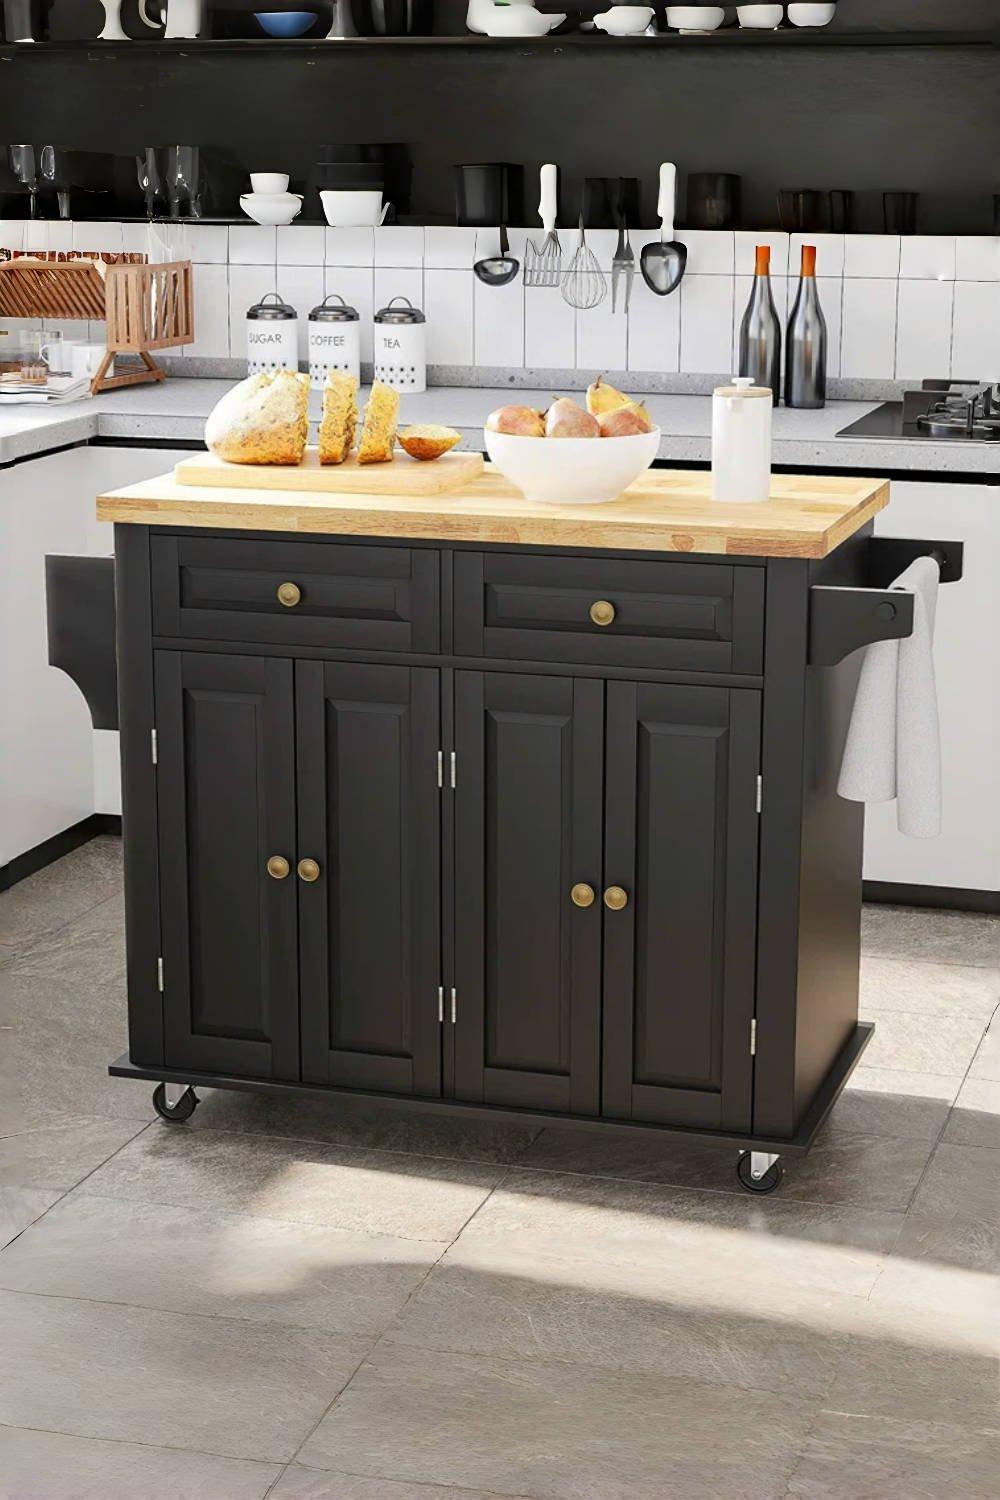 106cm W x 93cm H Black Kitchen Catering Trolley with 4 Doors and 2 Drawers